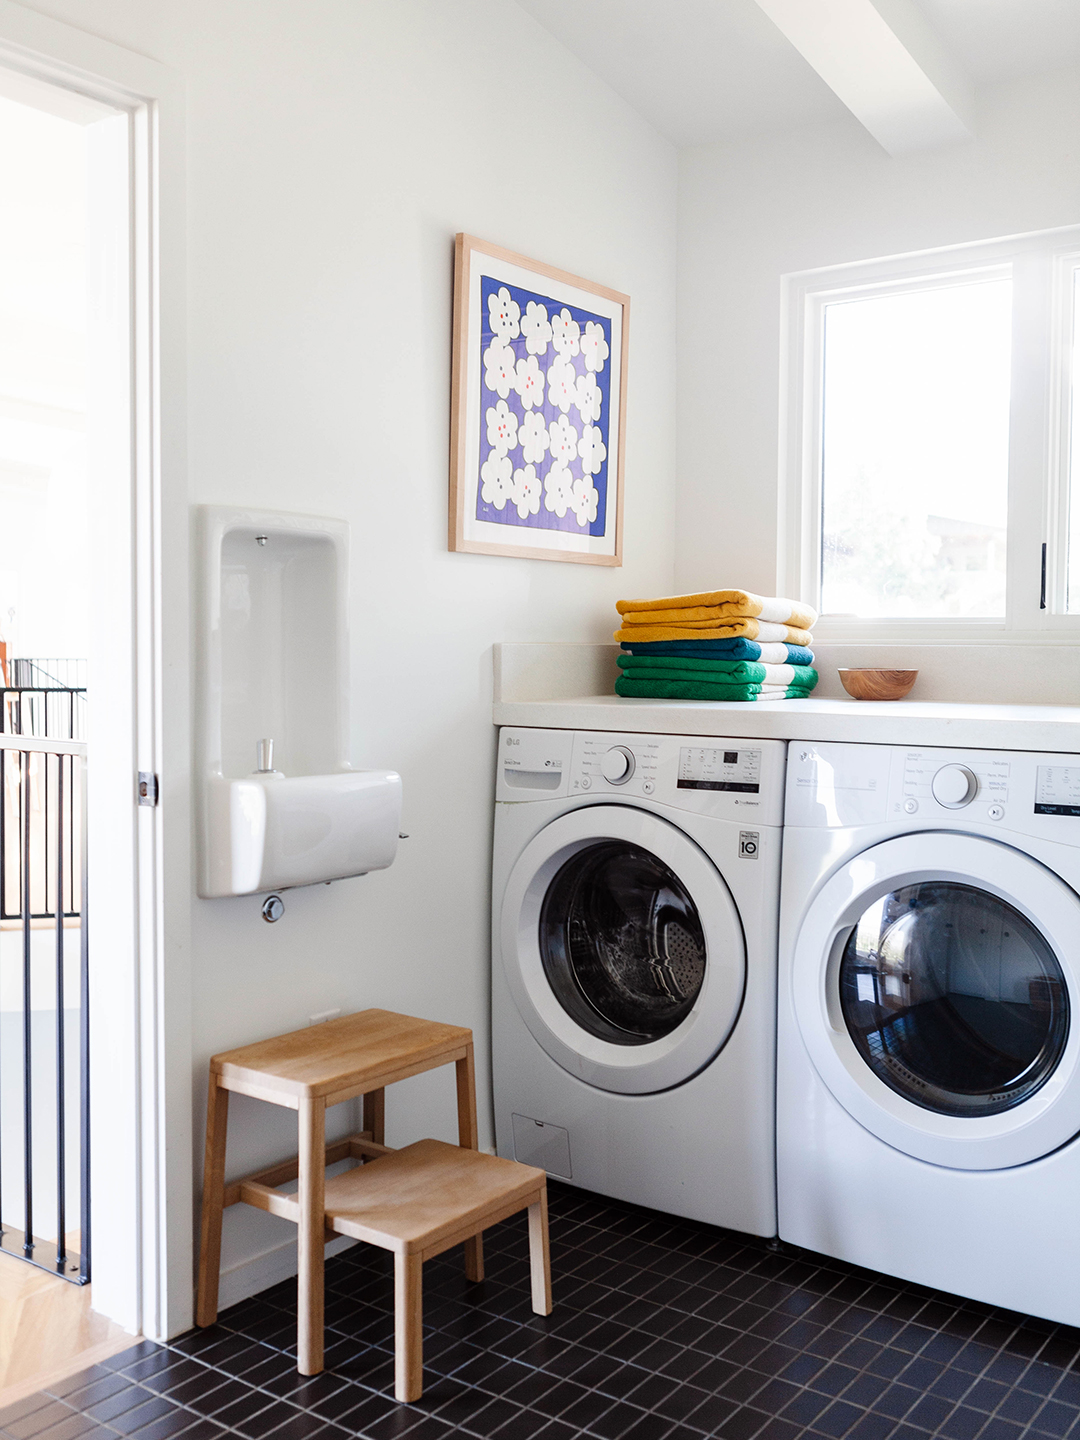 OUR SMALL SPACE LAUNDRY ROOM // — Me and Mr. Jones